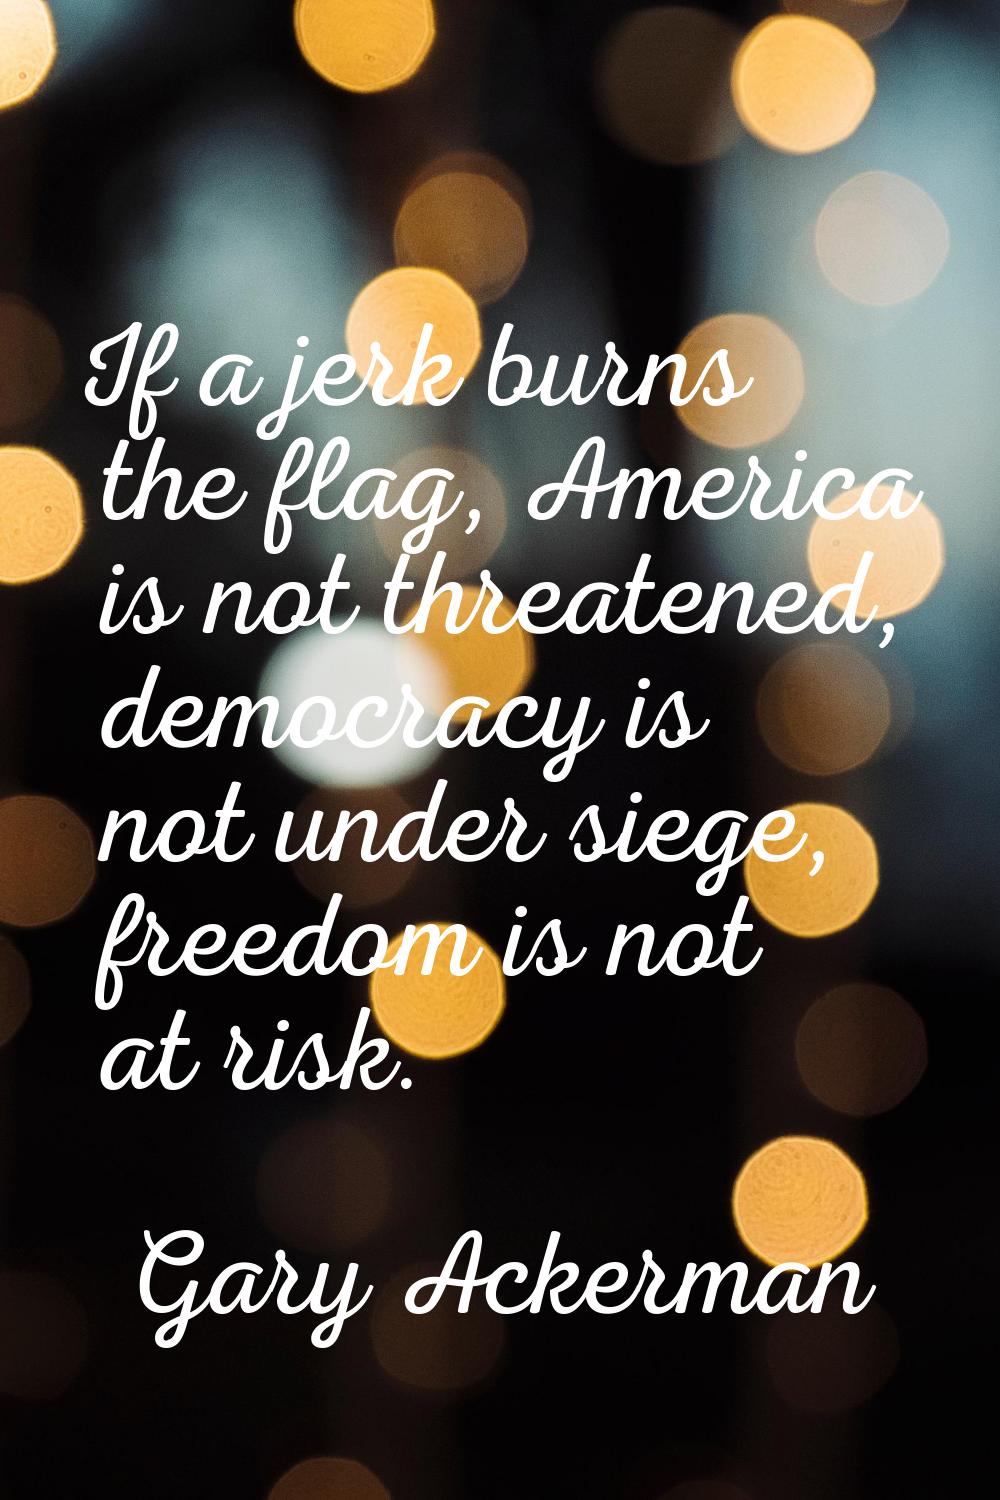 If a jerk burns the flag, America is not threatened, democracy is not under siege, freedom is not a